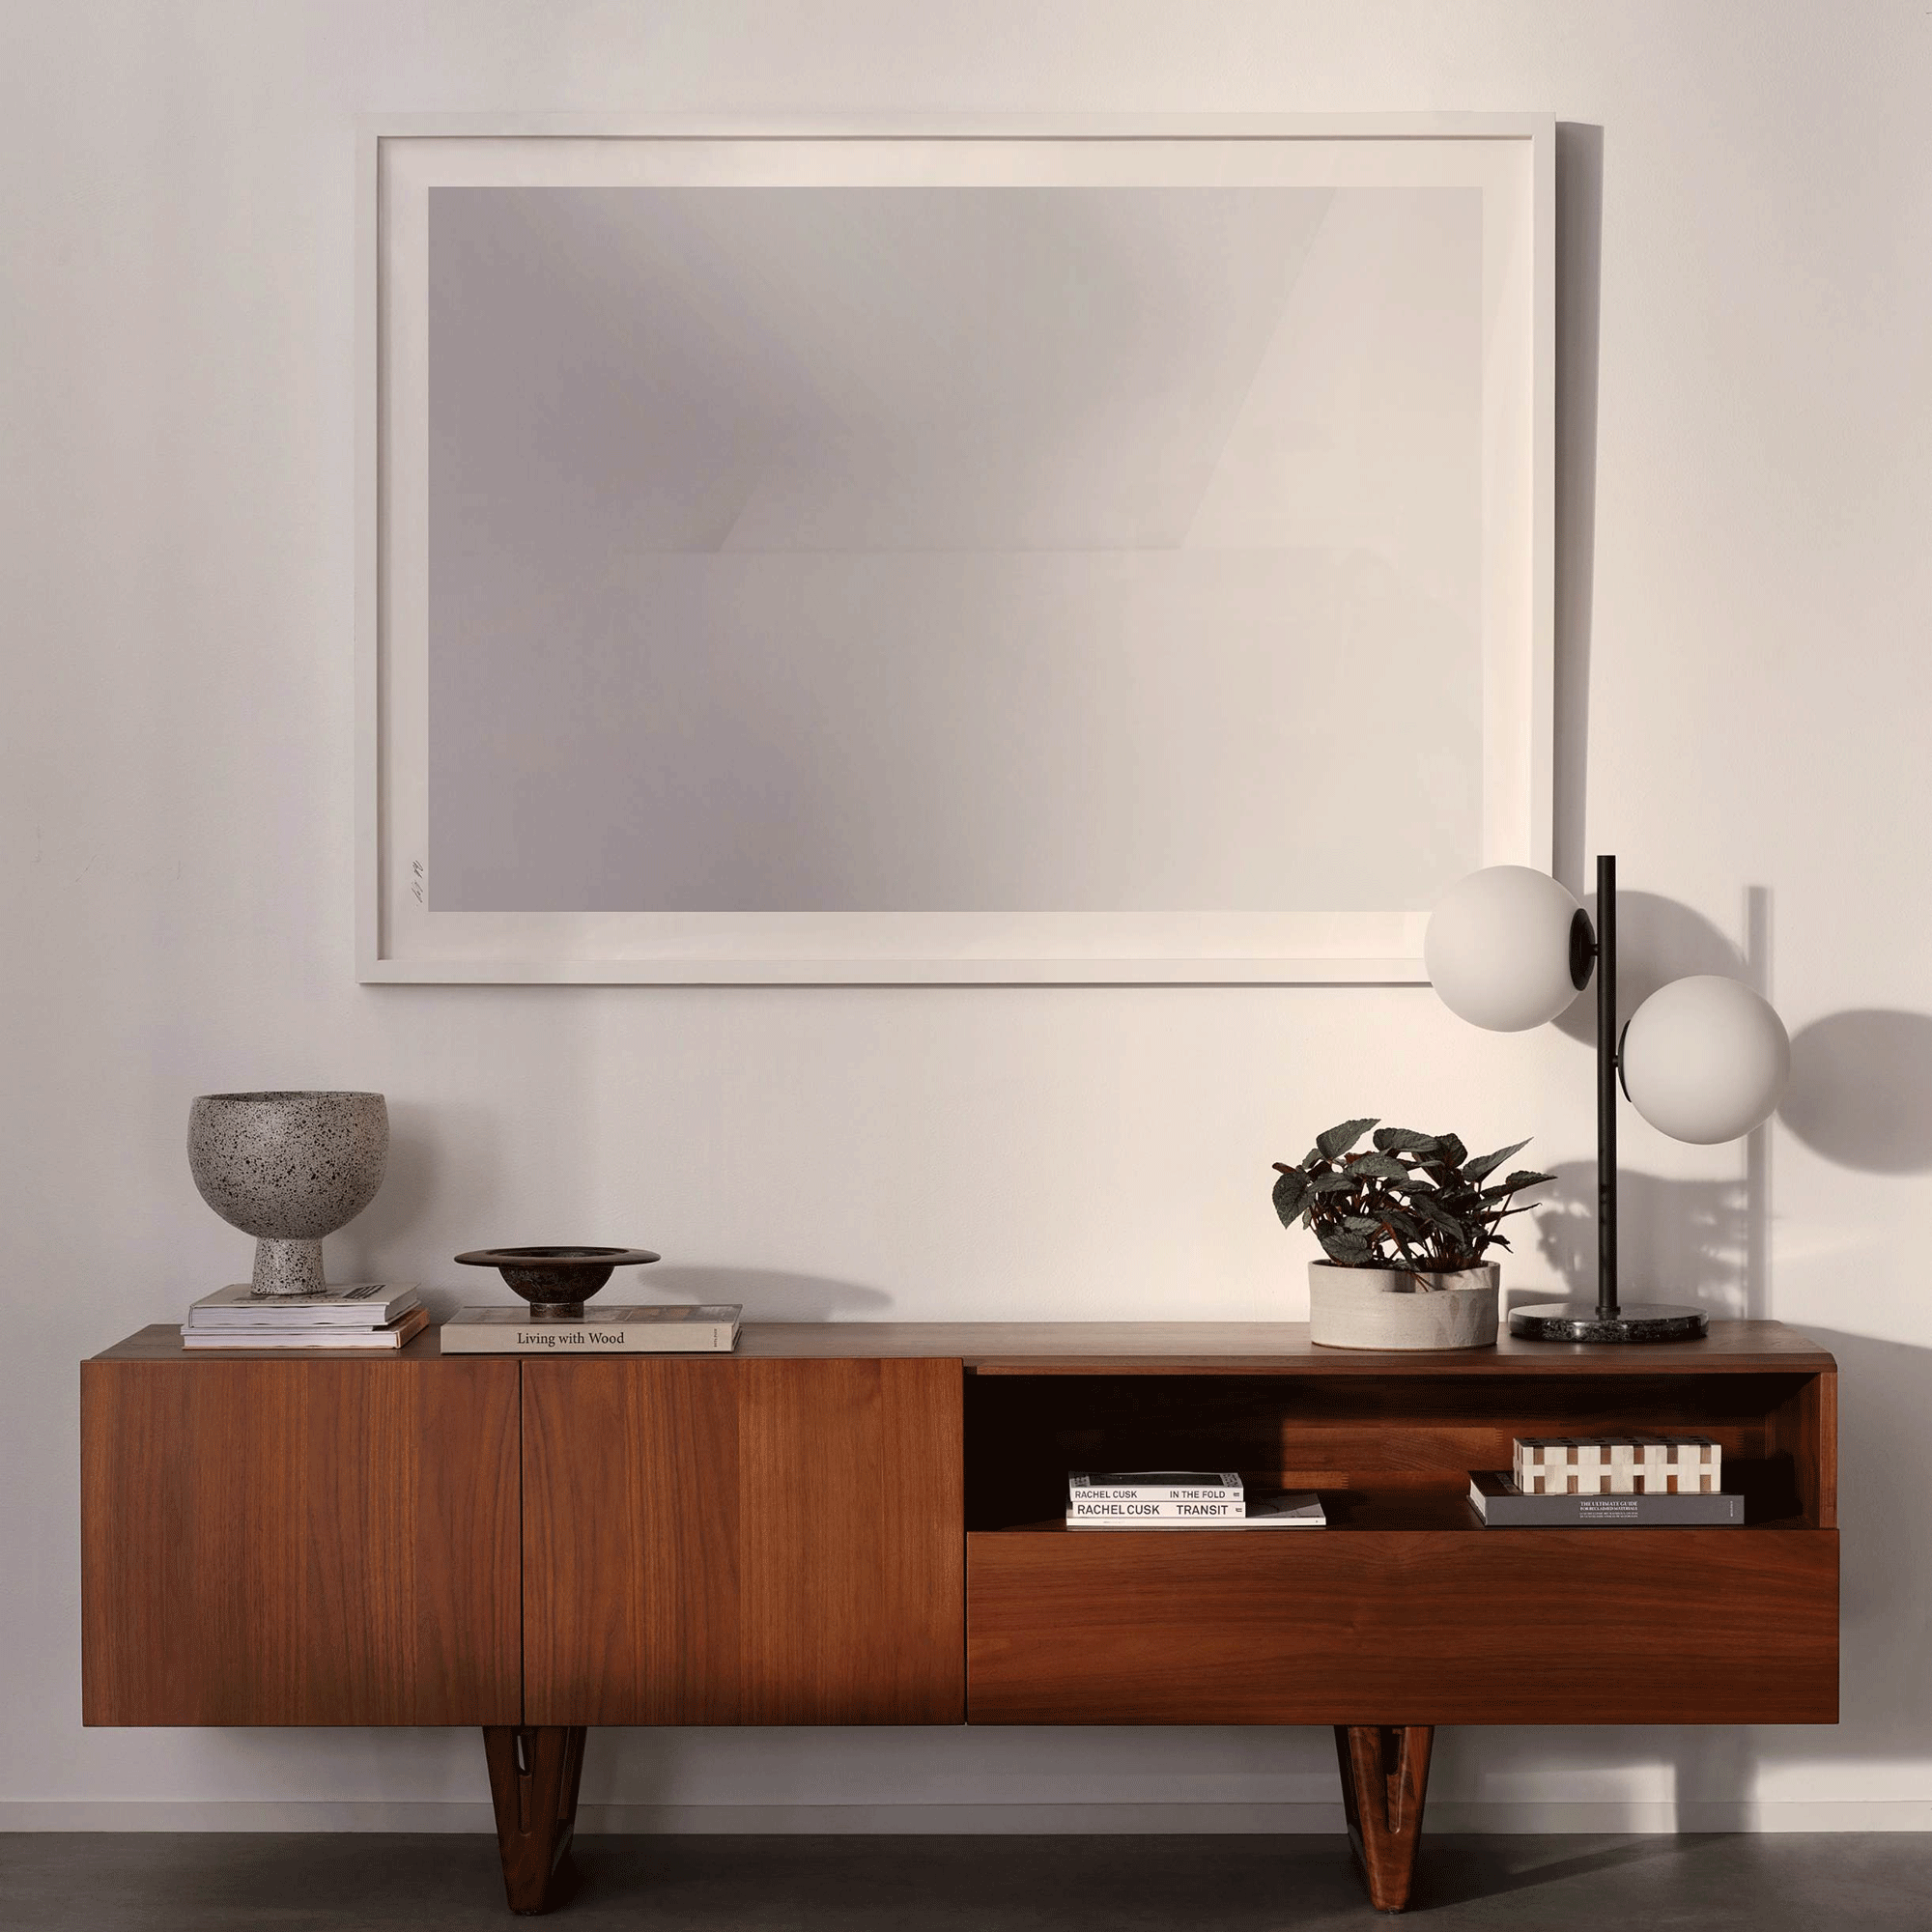 Wooden sideboard in dining room